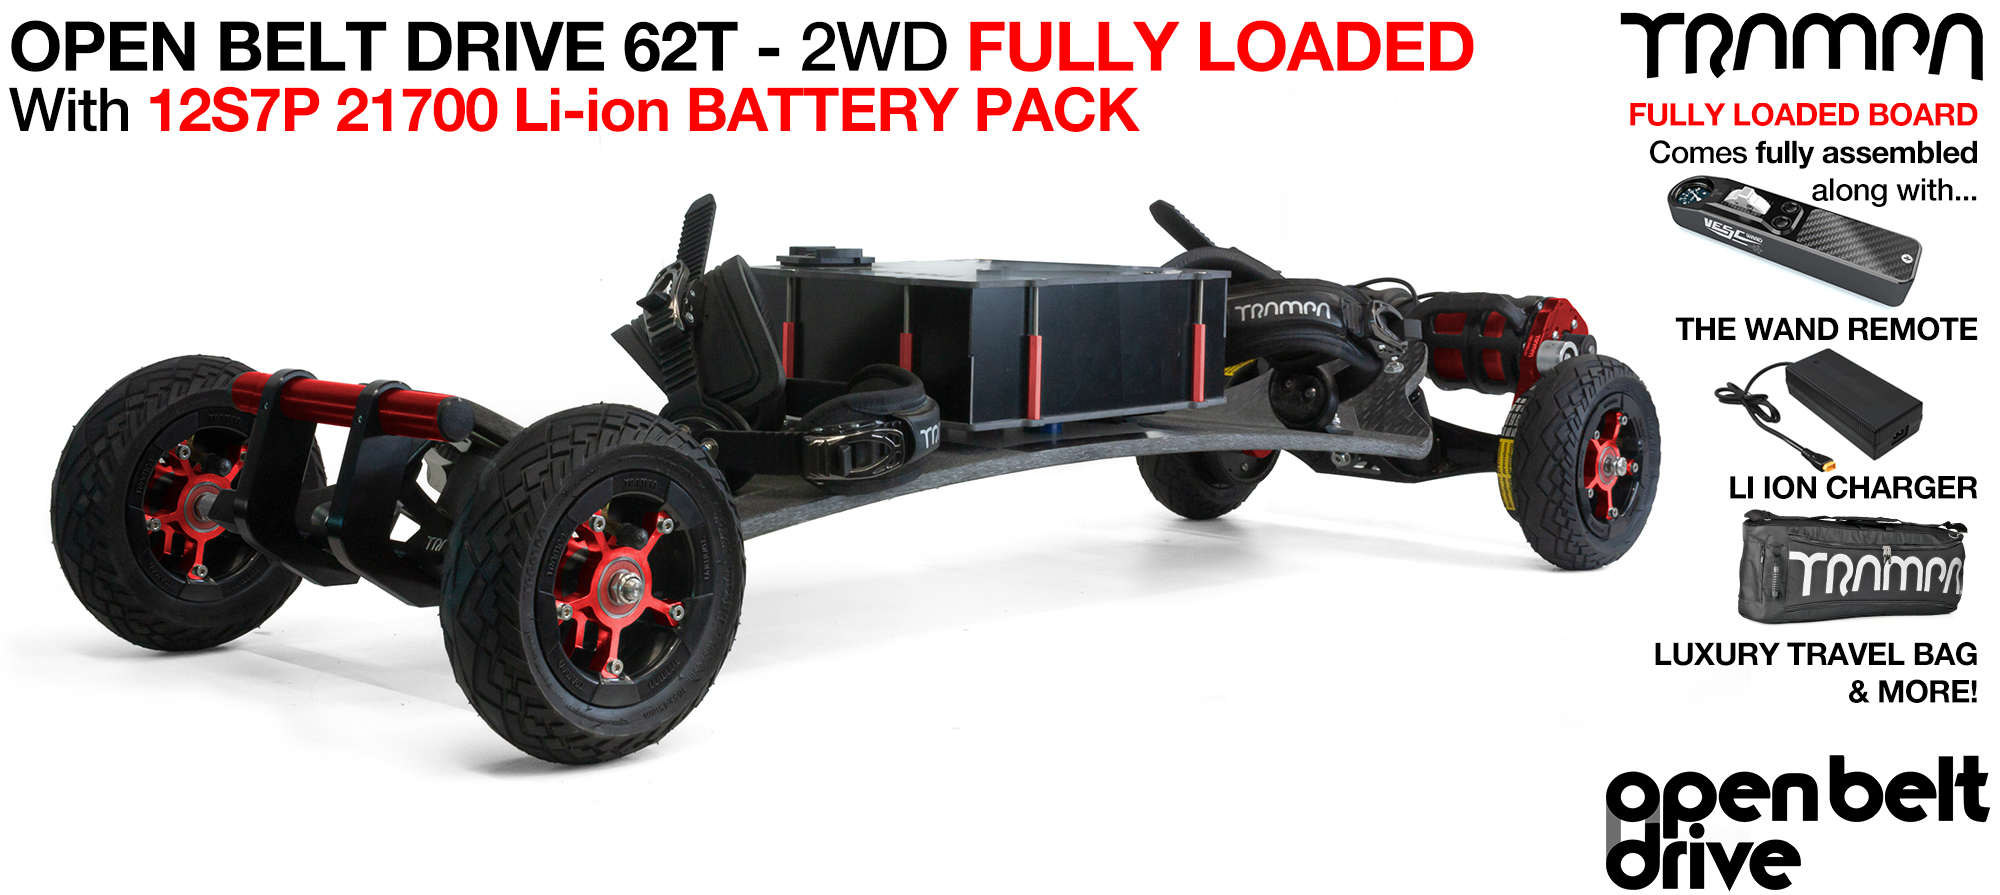 2WD 66T Open Belt Drive TRAMPA Electric Mountainboard with 6 Inch URBAN TREADs Wheels & 62 Tooth Pulleys - FULLY LOADED 21700 CELL Pack